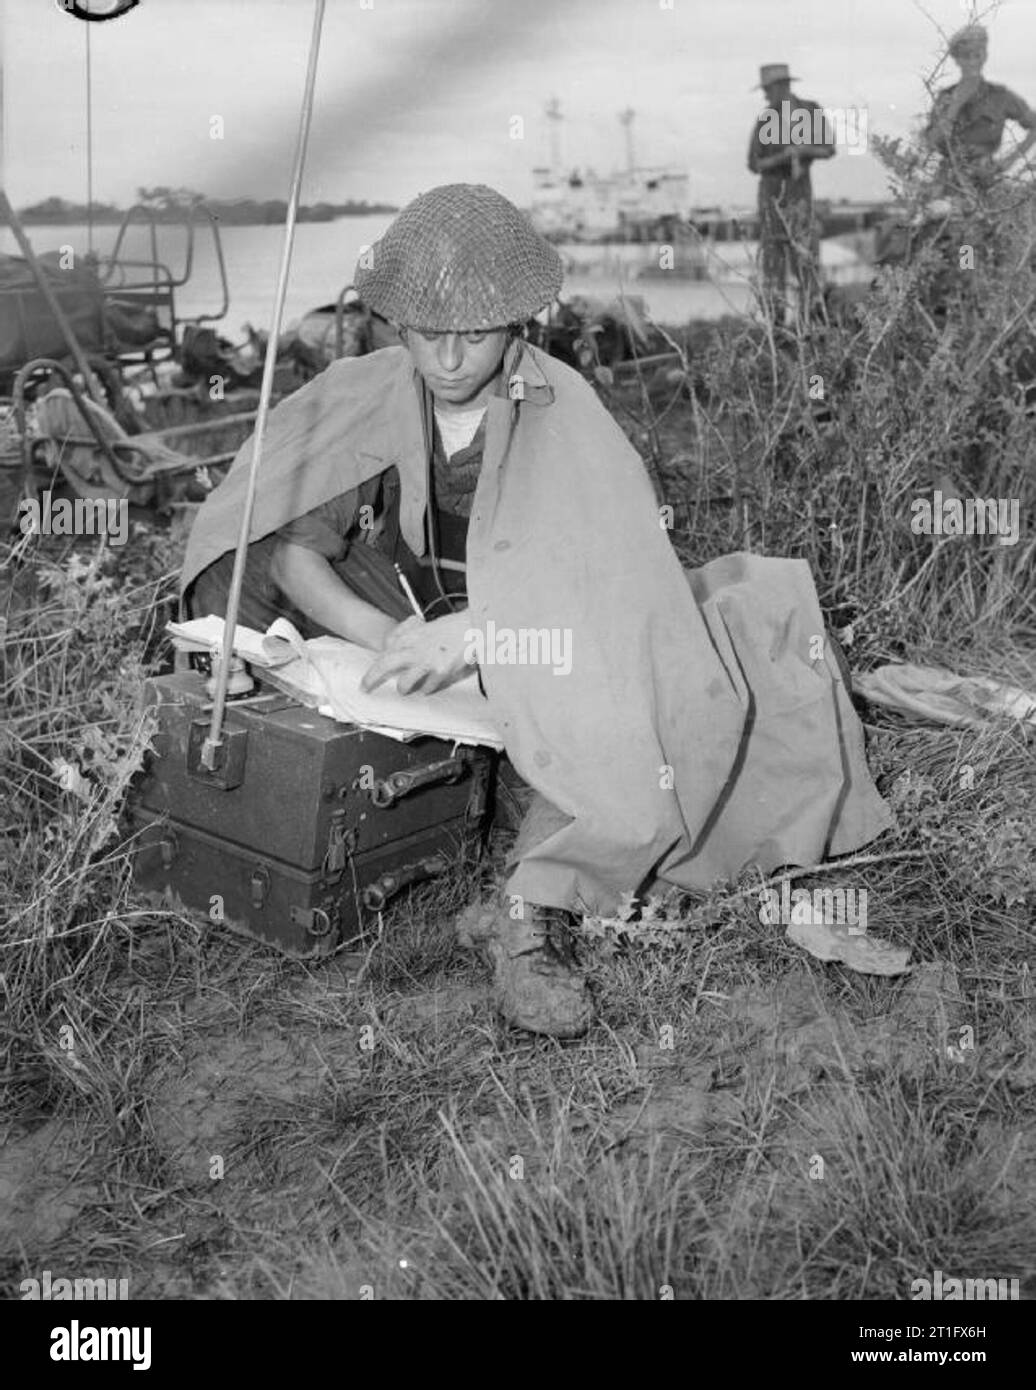 The British Army in Burma 1945 Telegraphist Brindle transmitting messages in the rain shortly after landing south of Rangoon at the beginning of Operation 'Dracula', 3 May 1945. Stock Photo